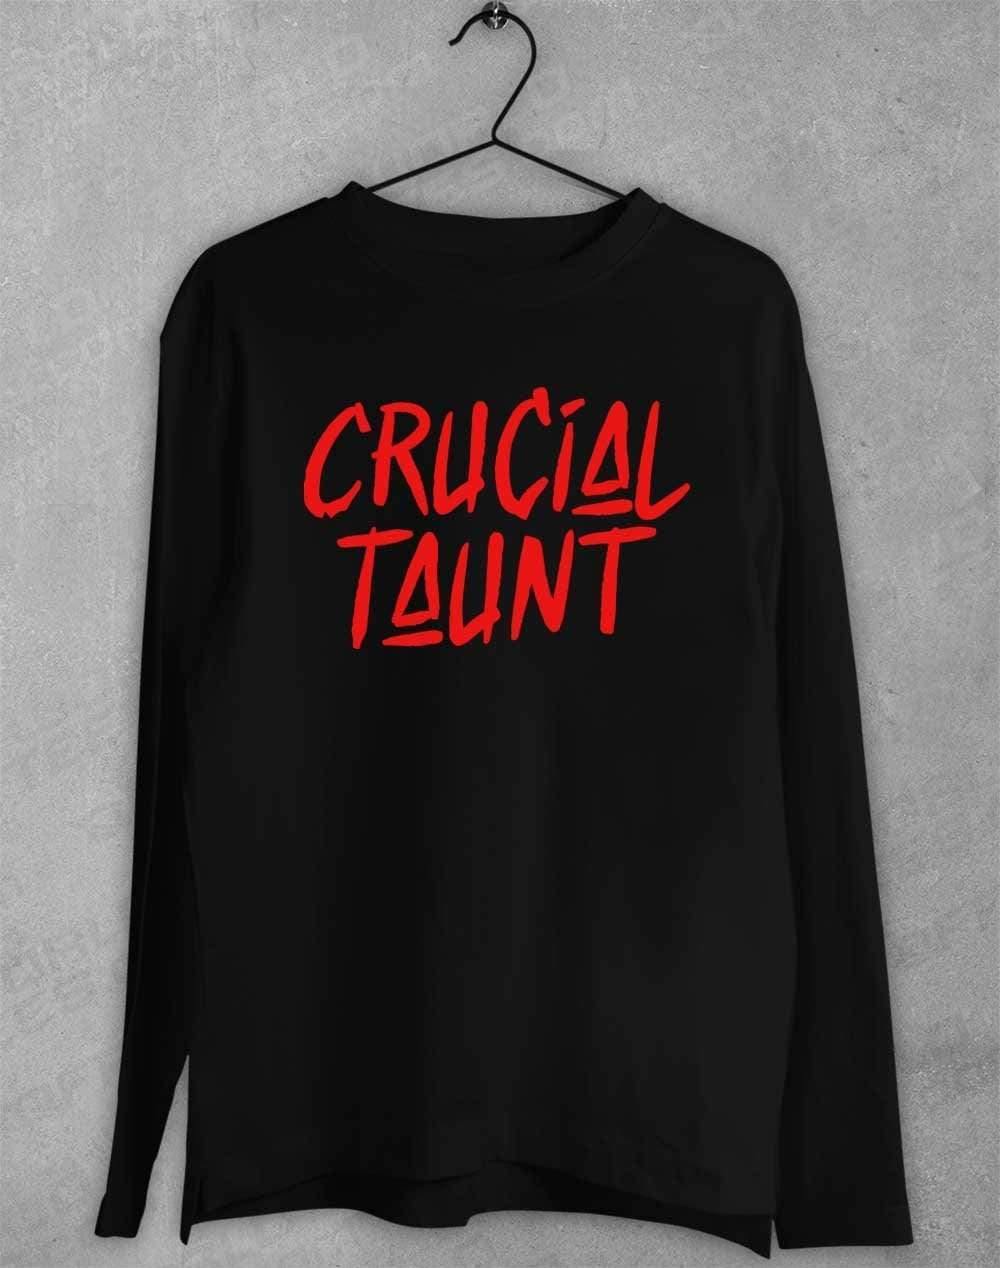 Crucial Taunt Long Sleeve T-Shirt S / Black  - Off World Tees